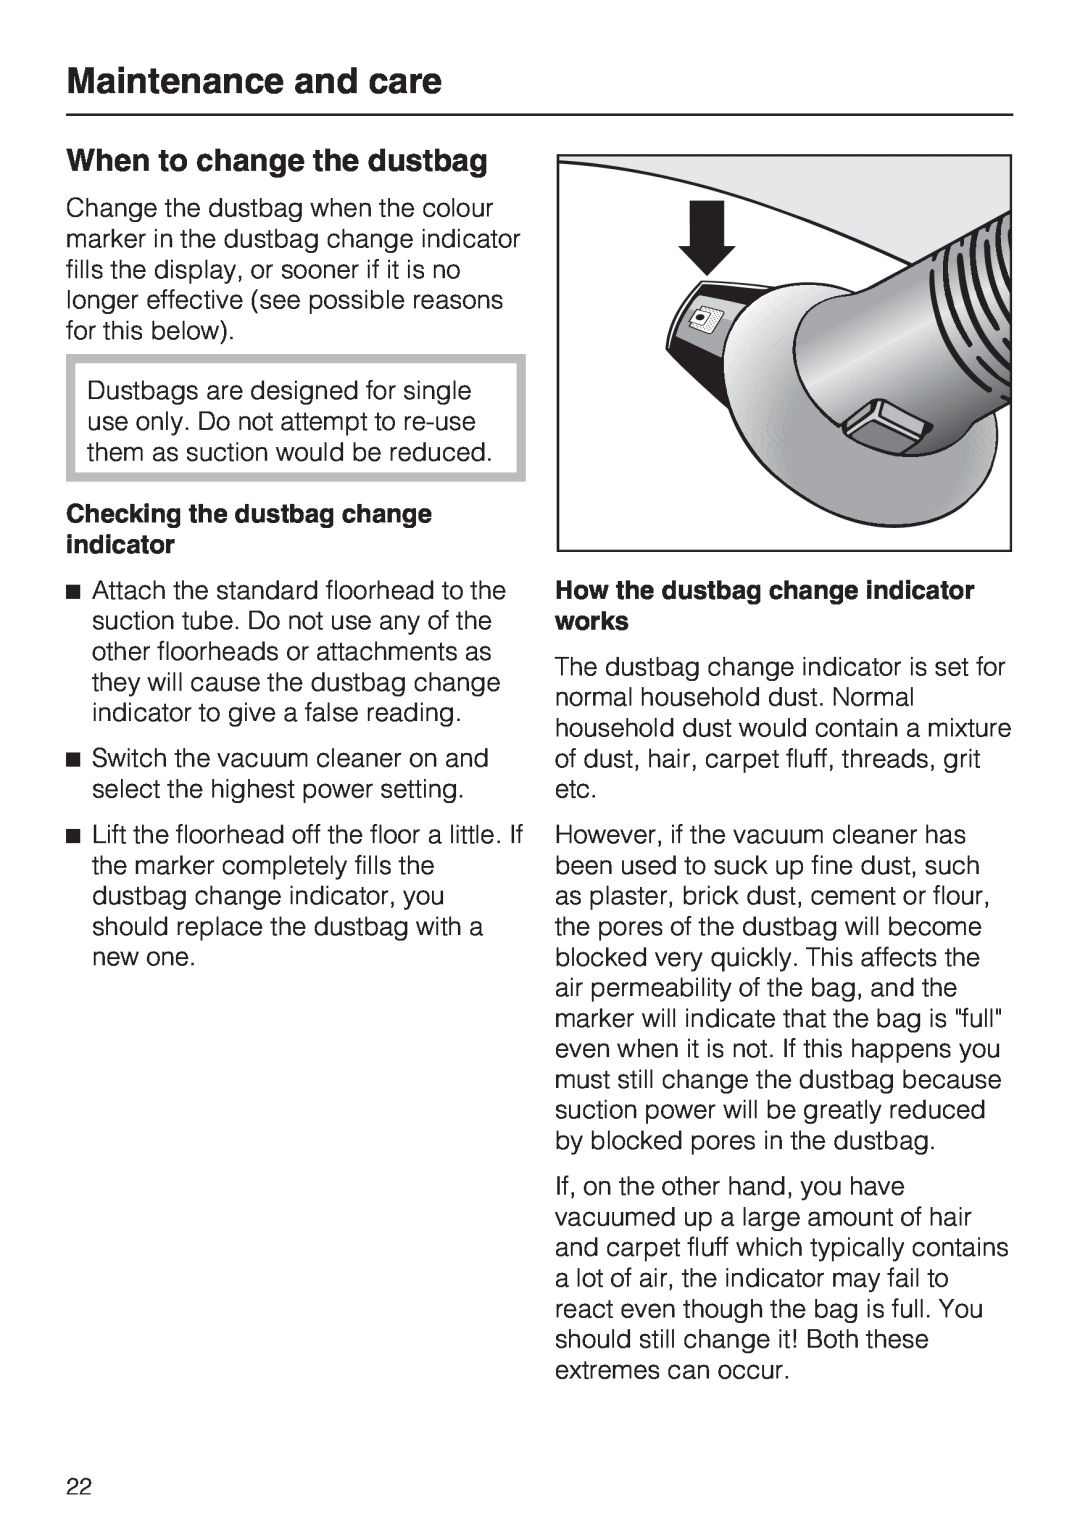 Miele S 4000 Series manual When to change the dustbag, Maintenance and care, Checking the dustbag change indicator 